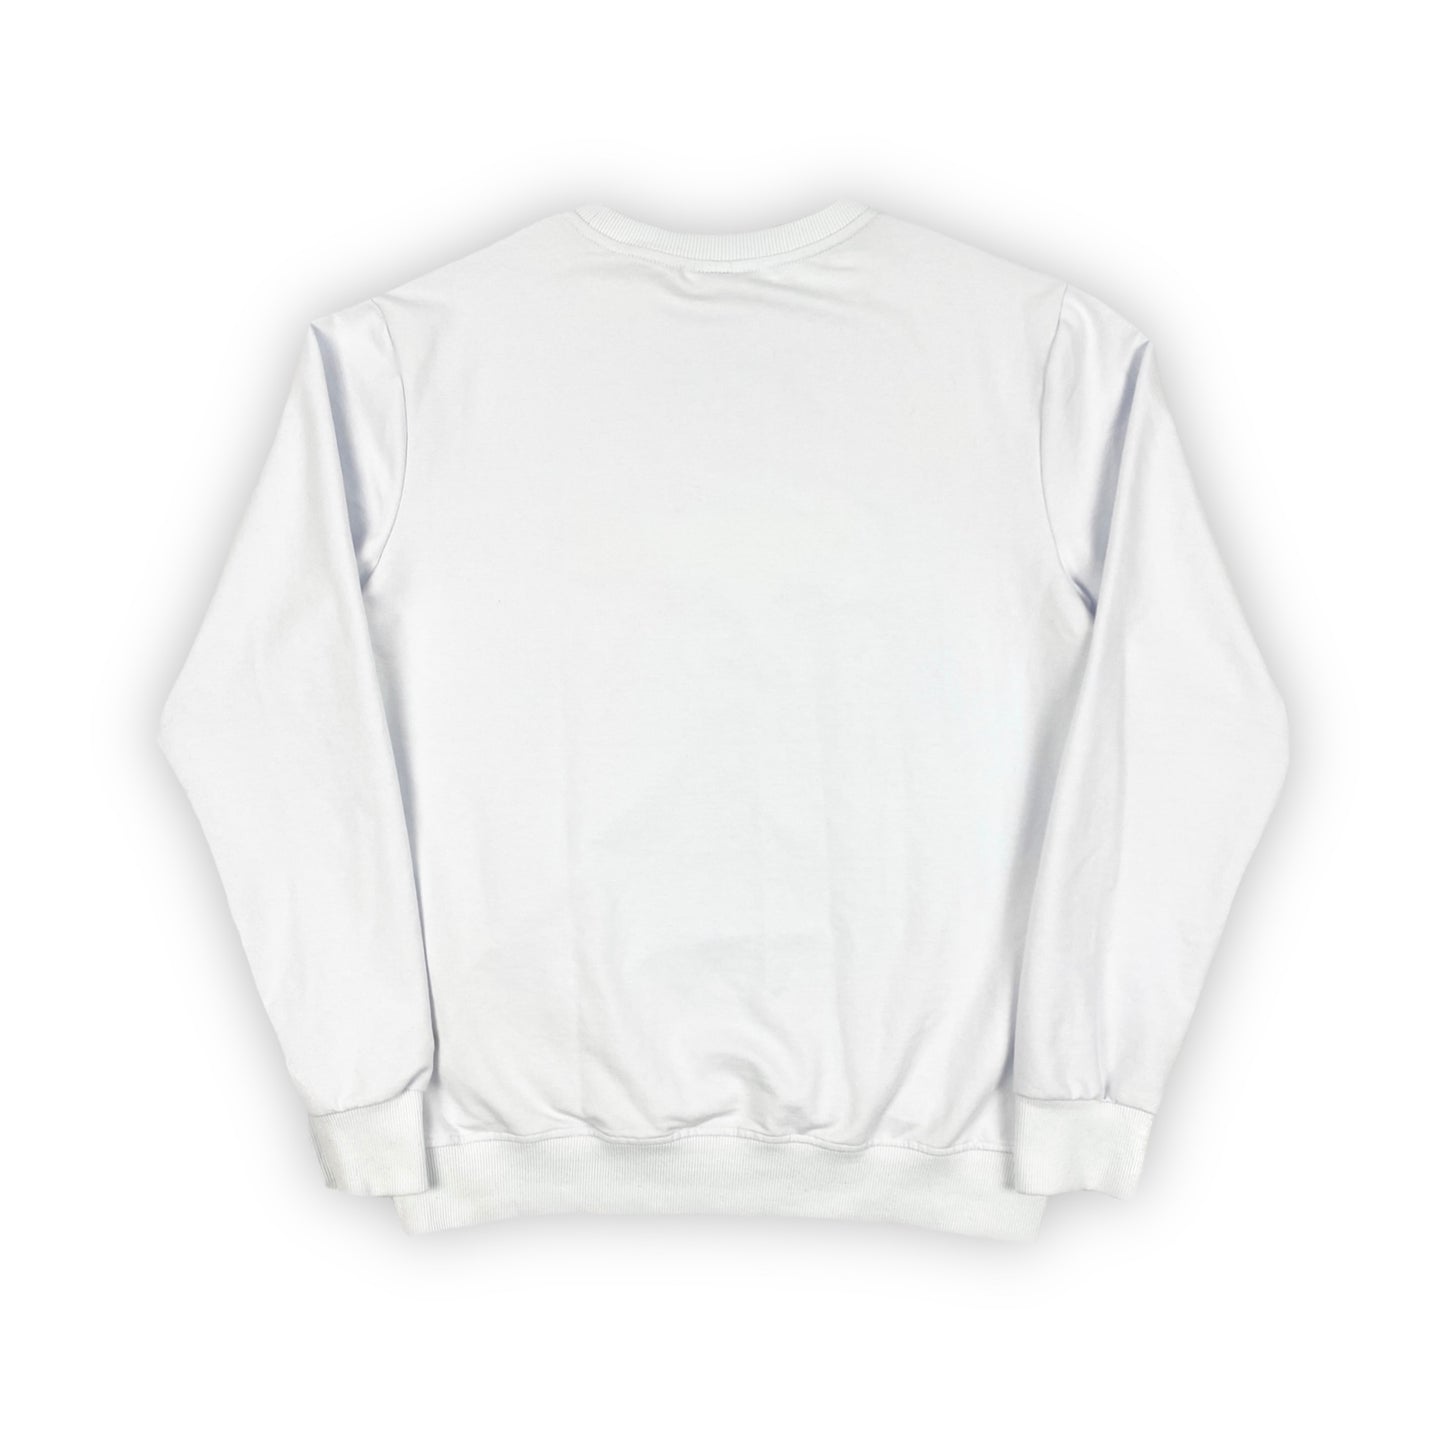 LACOSTE Embroidered Logo Sweater